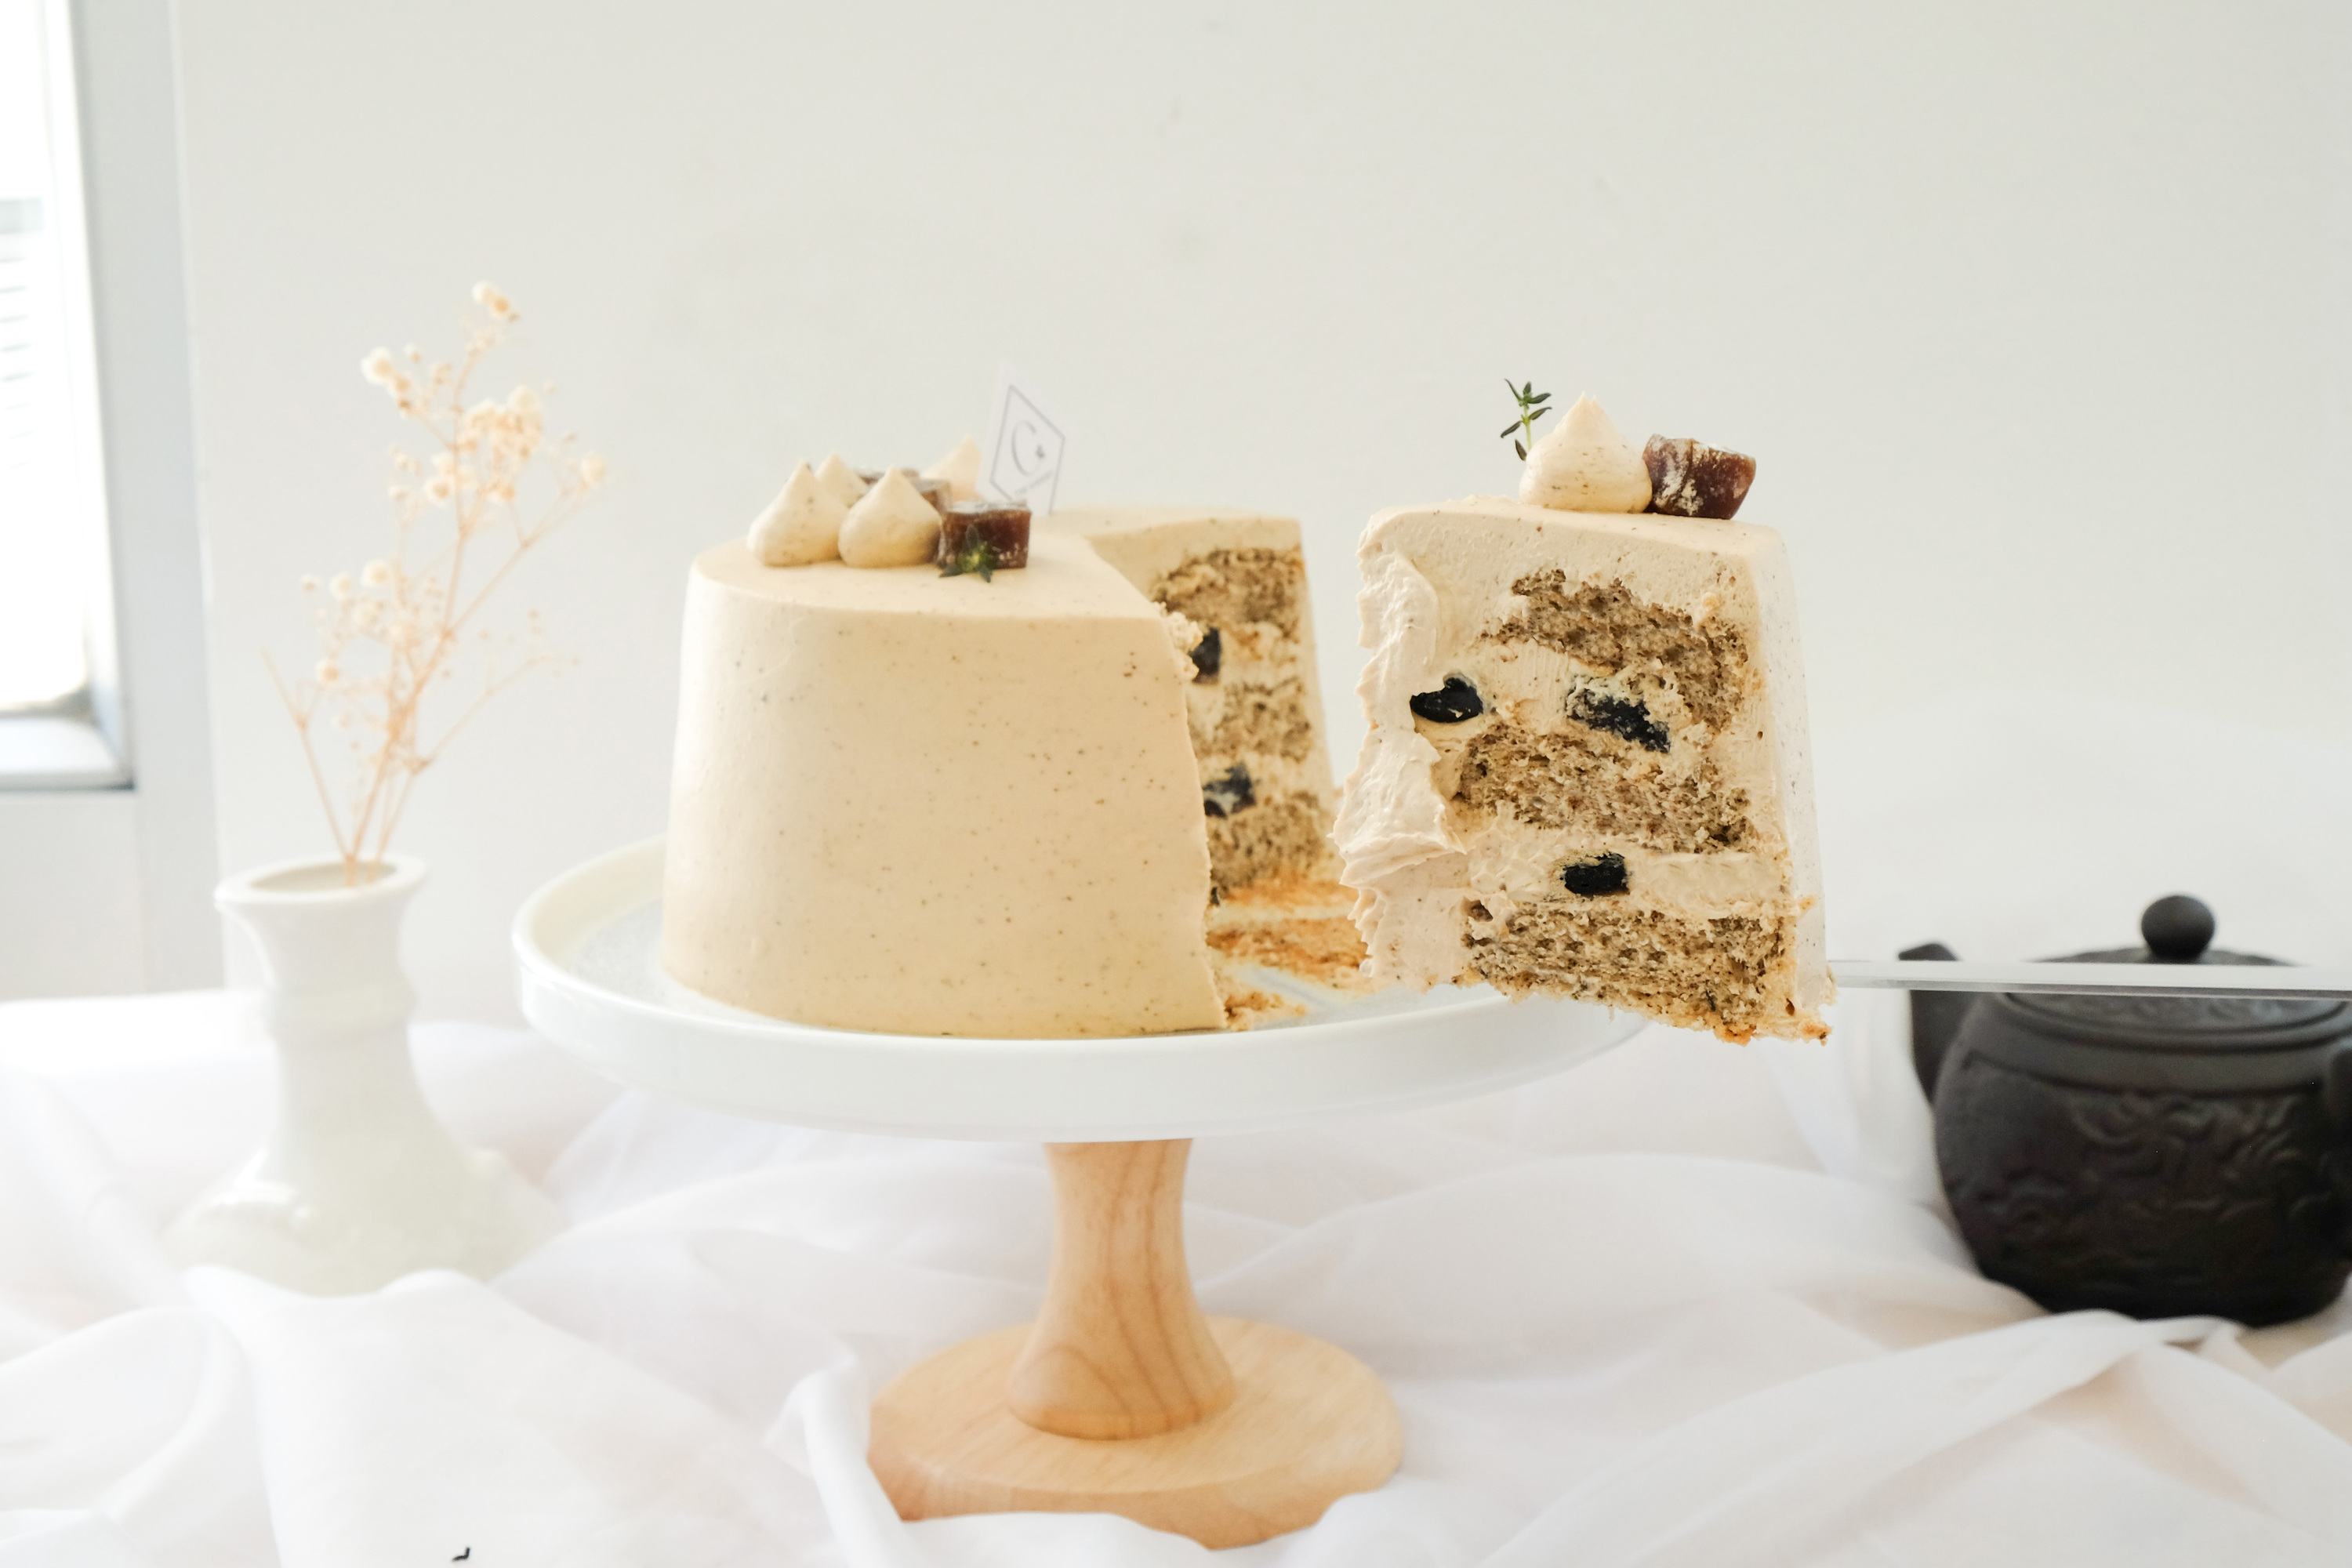 217 Square Tier Cake Images, Stock Photos & Vectors | Shutterstock